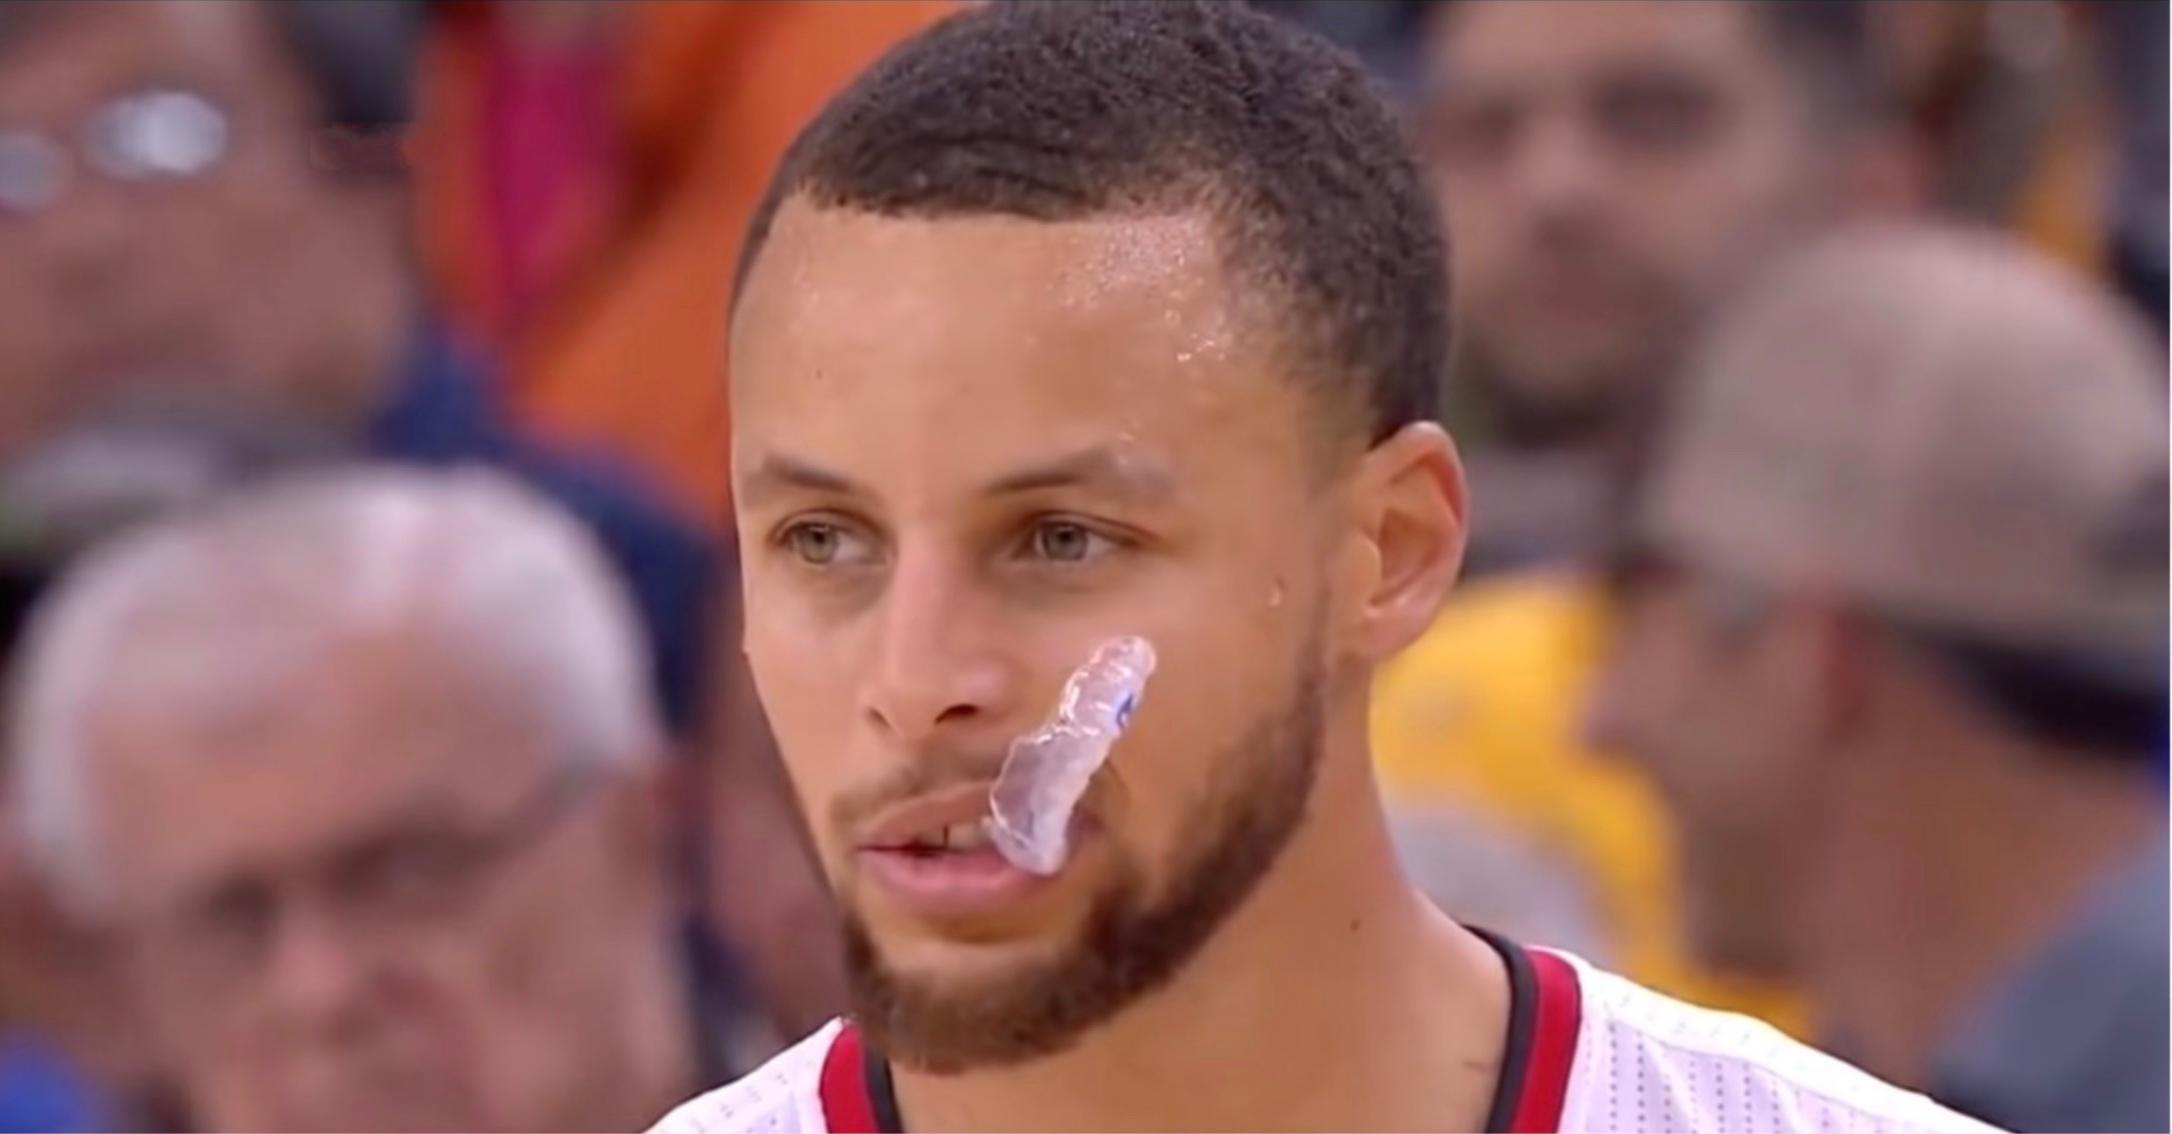 Steph Curry chews his mouthguard during a game.